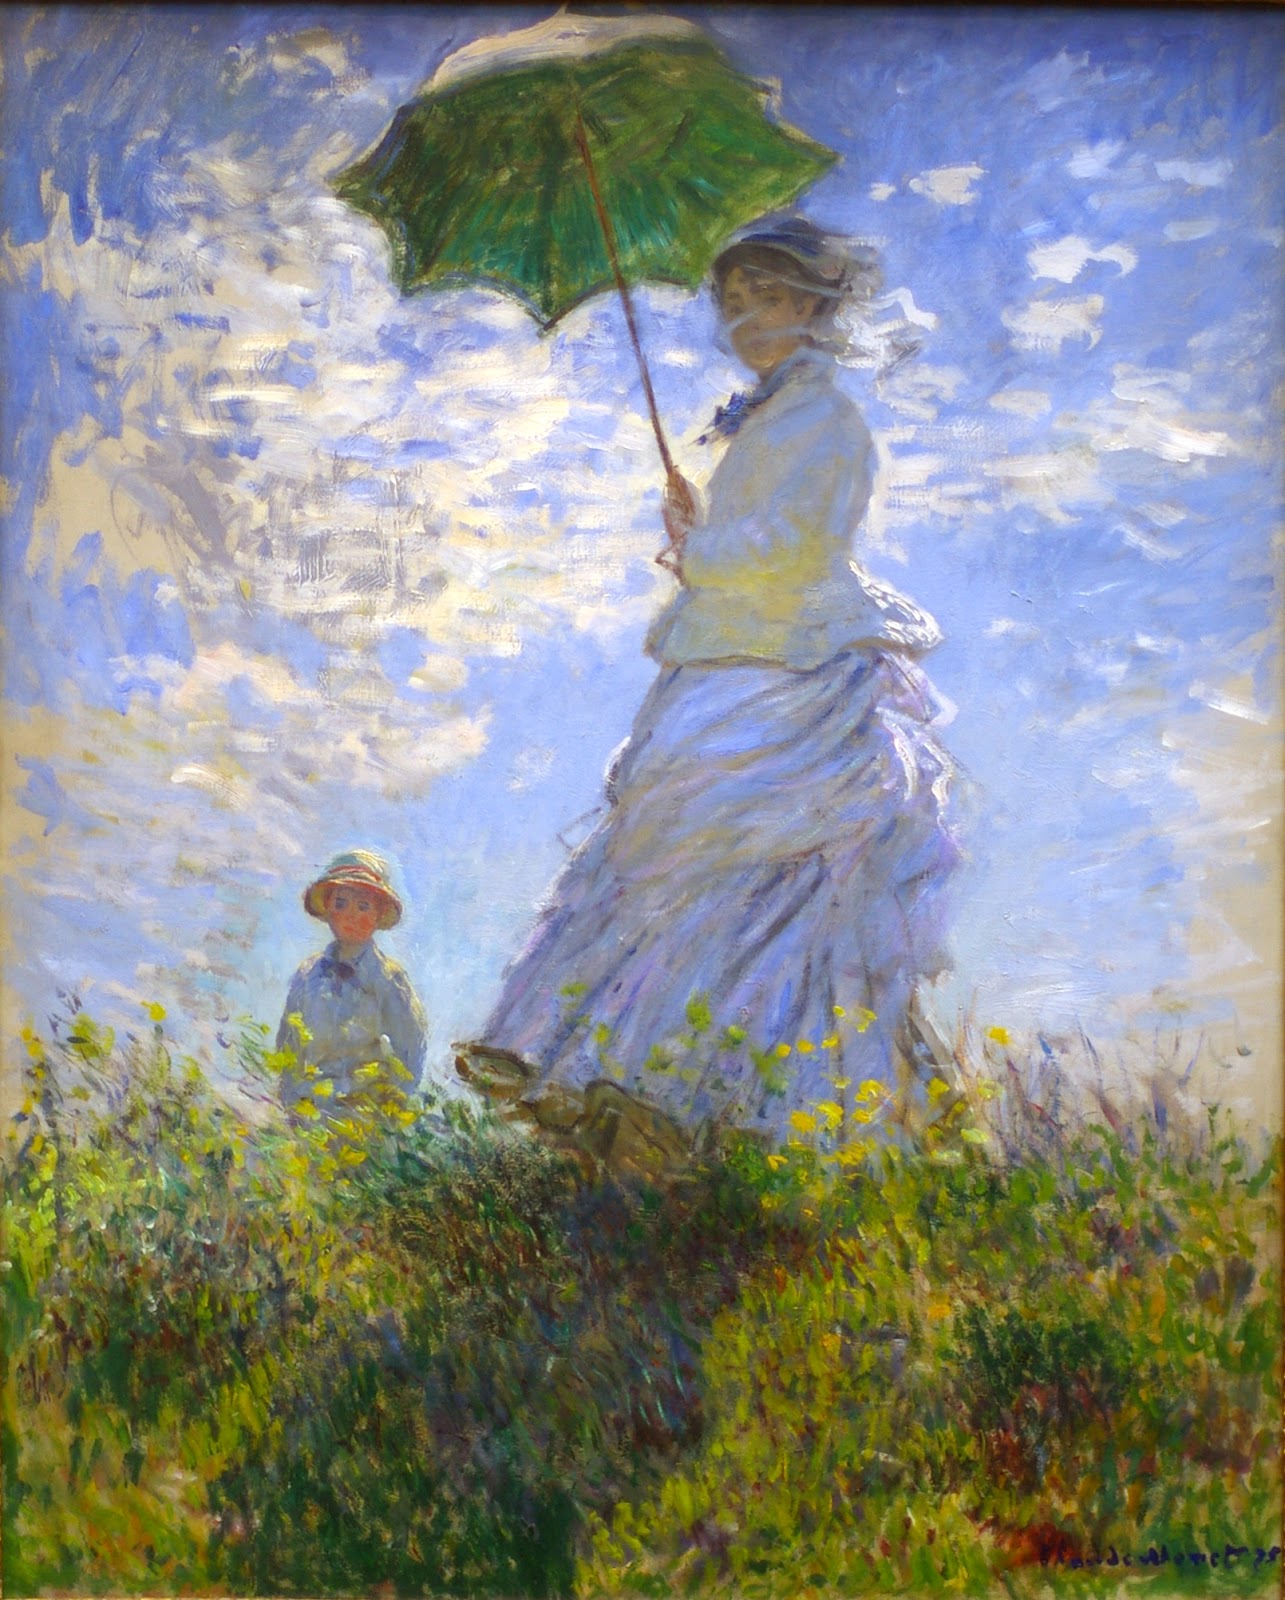 Woman with a Parasol by Claude Monet - 1875 - 100 × 81 cm National Gallery of Art